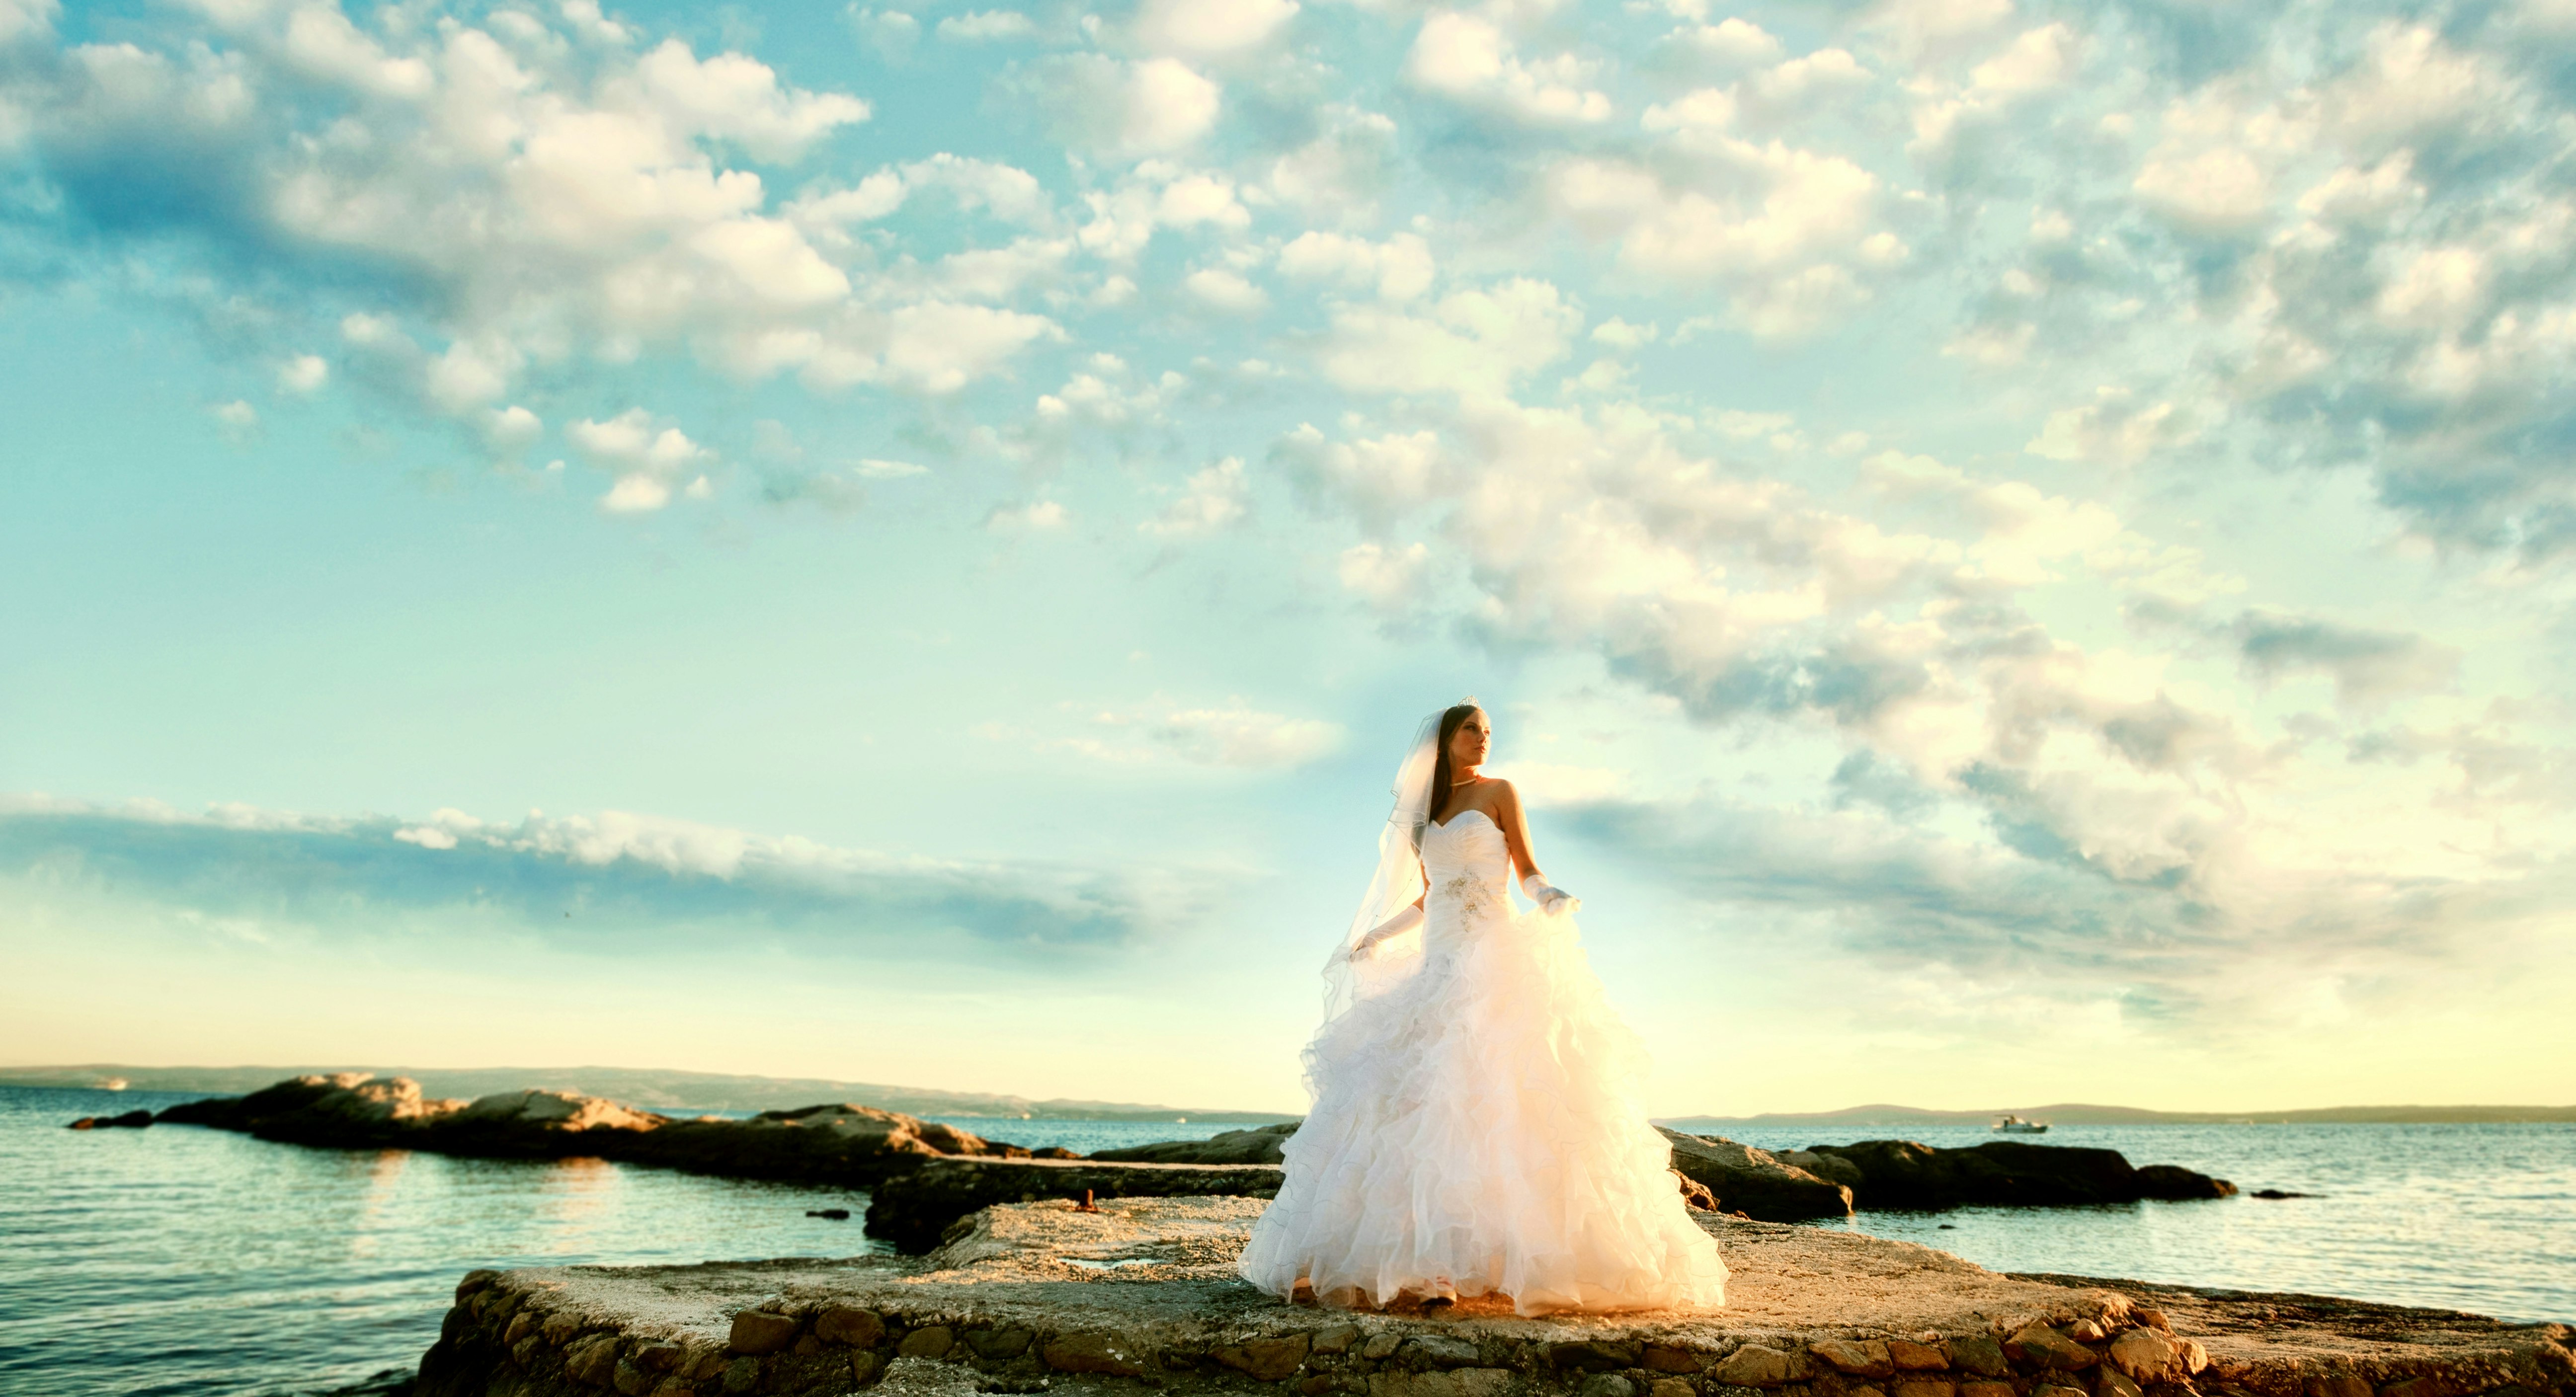 woman in white wedding dress standing on rock formation near body of water during daytime